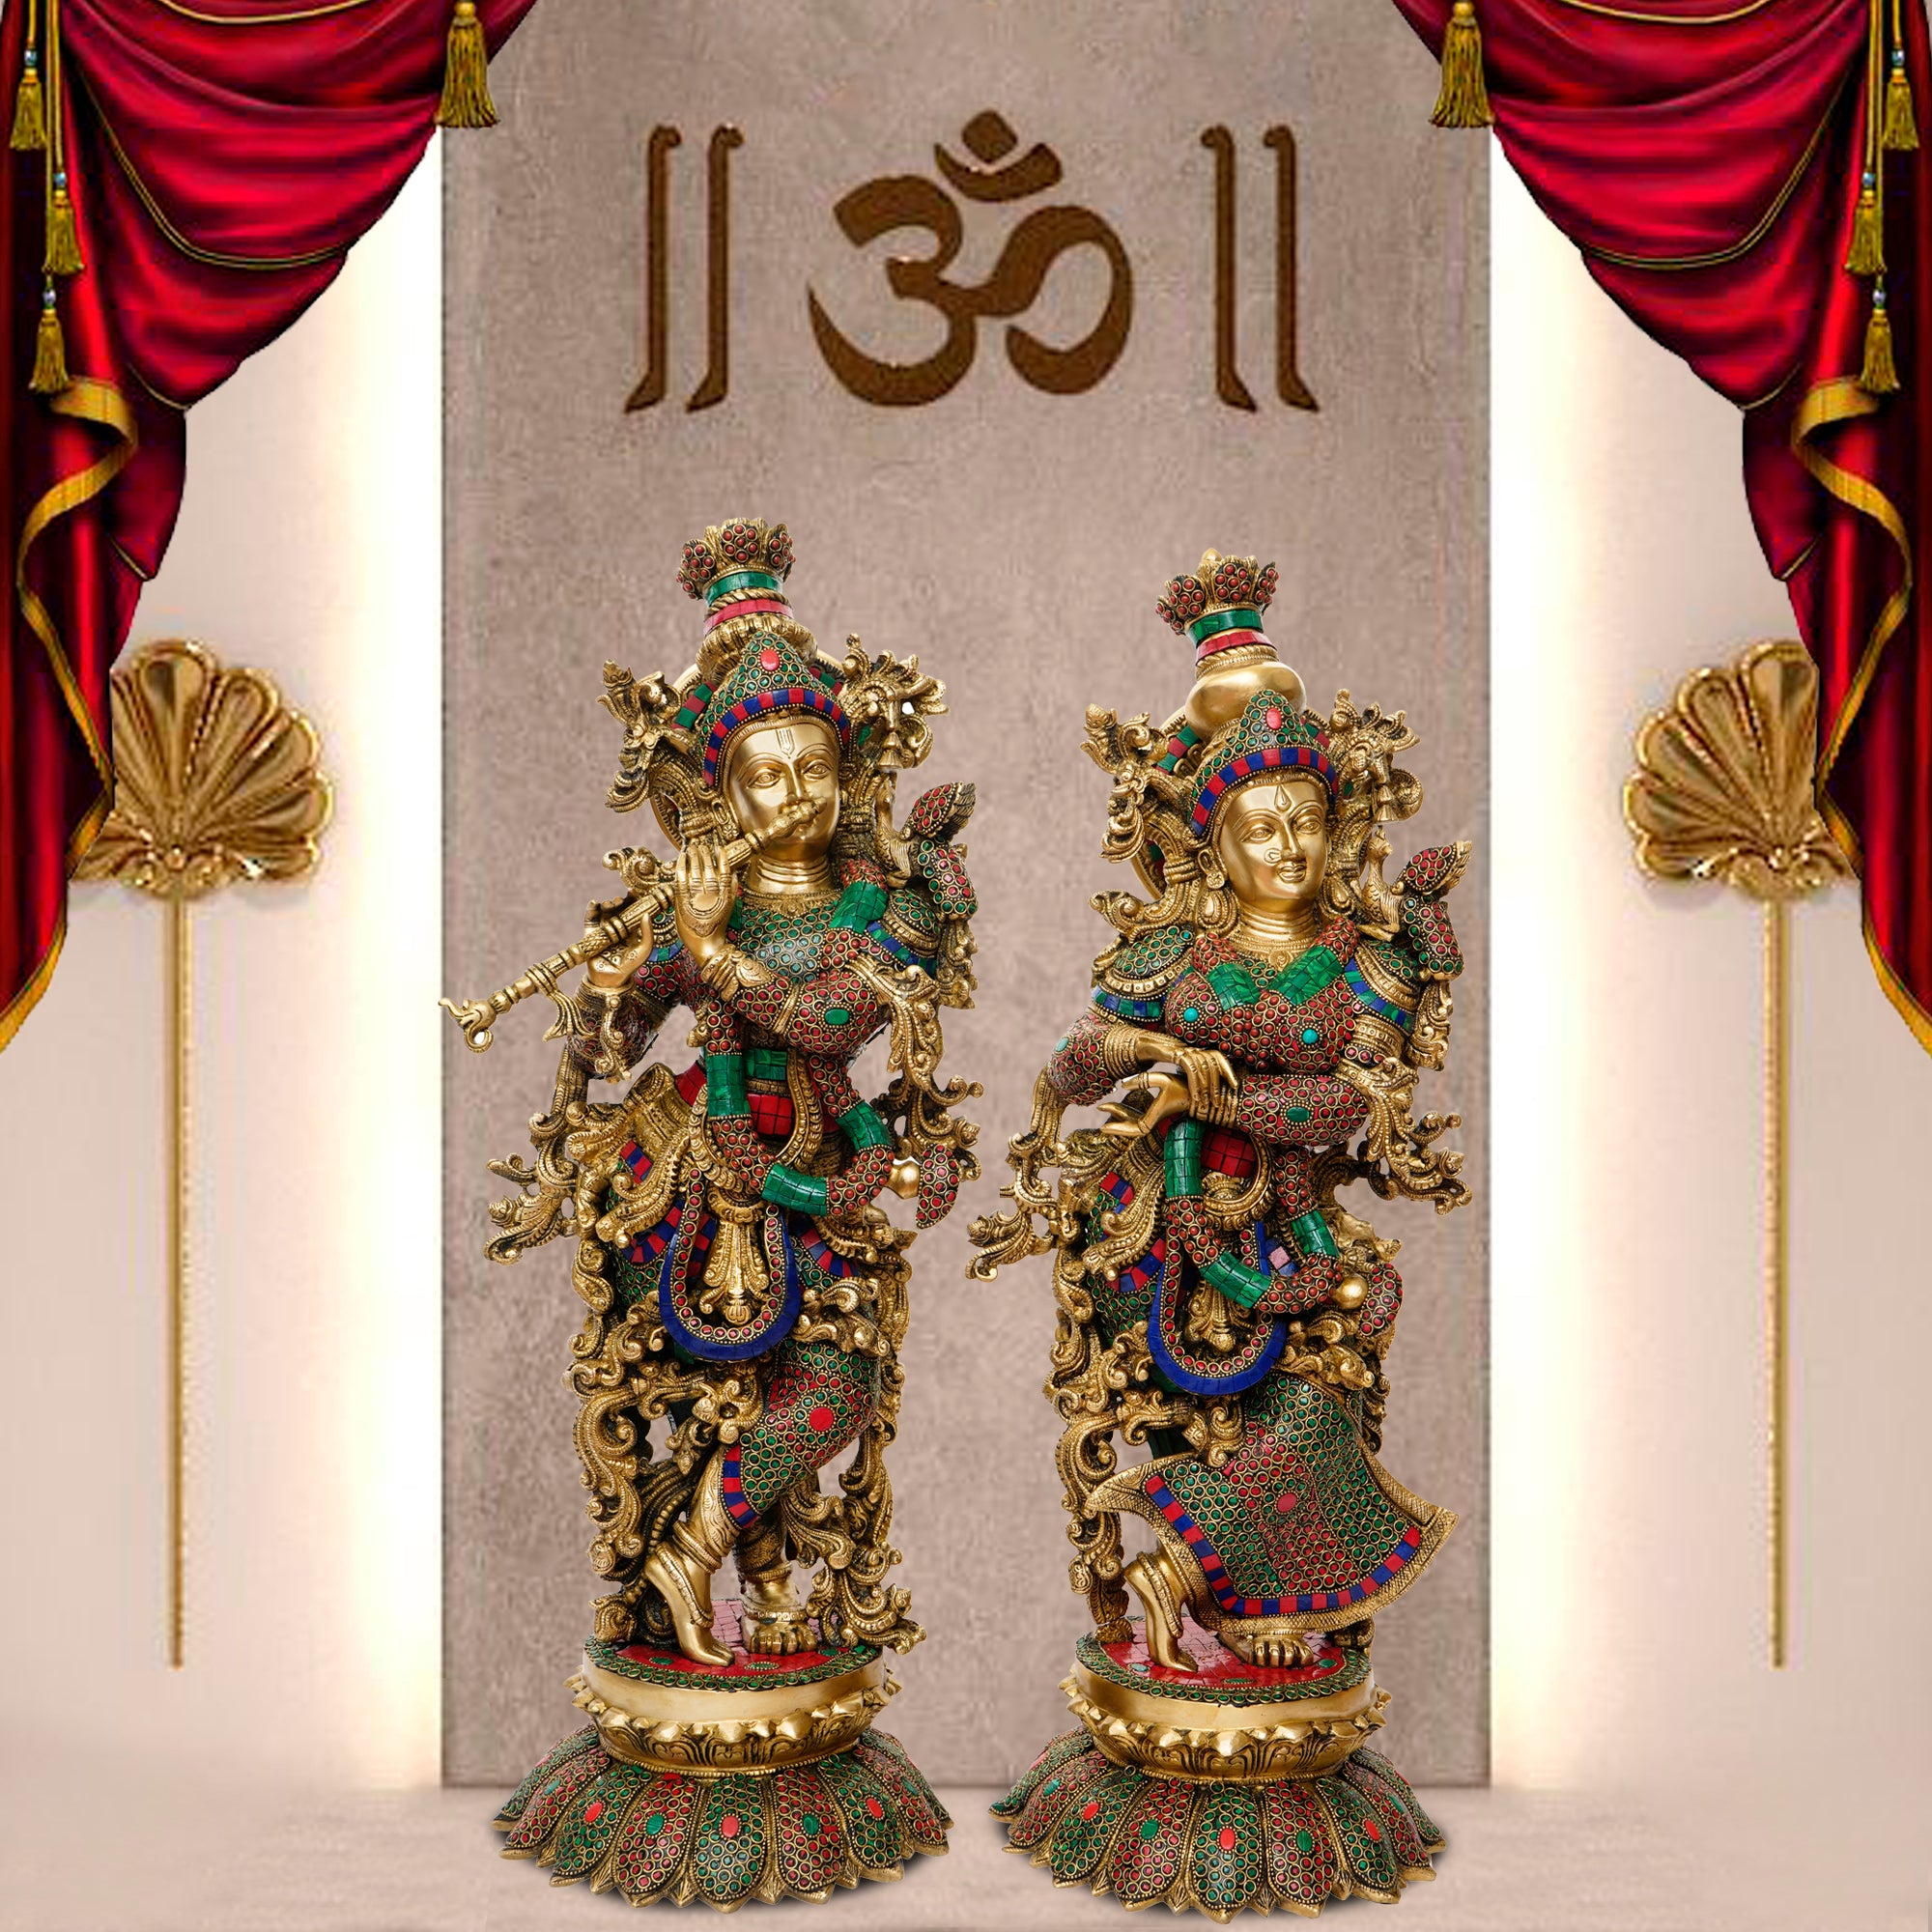 Golden Radha Krishna Playing Flute Handcrafted Brass Idol with Colorful Stone Work 1